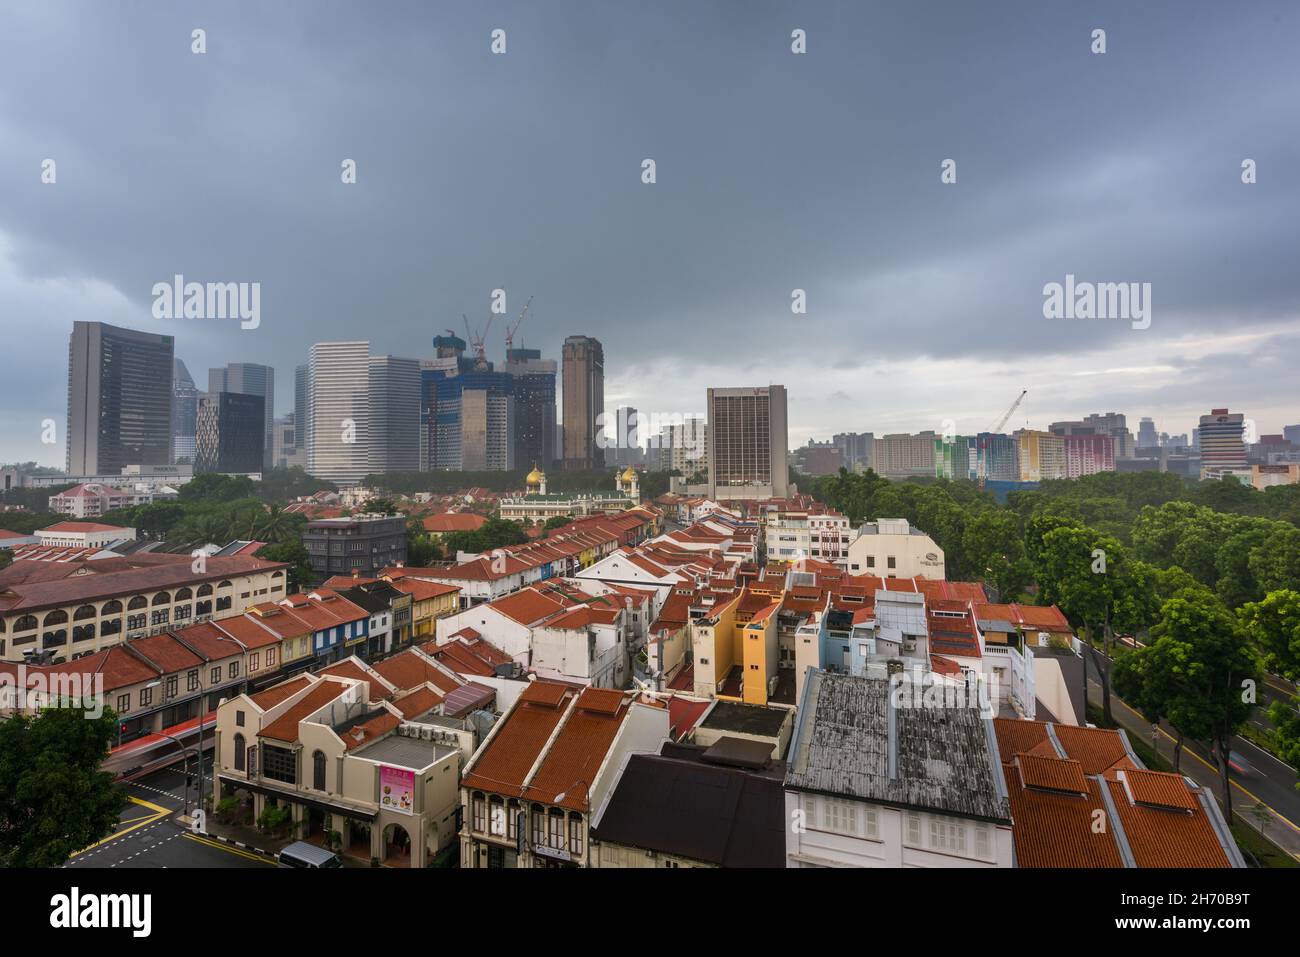 Singapore, 31 Dec 2015: Stormy weather over city skyline and historical landmarks. Stock Photo